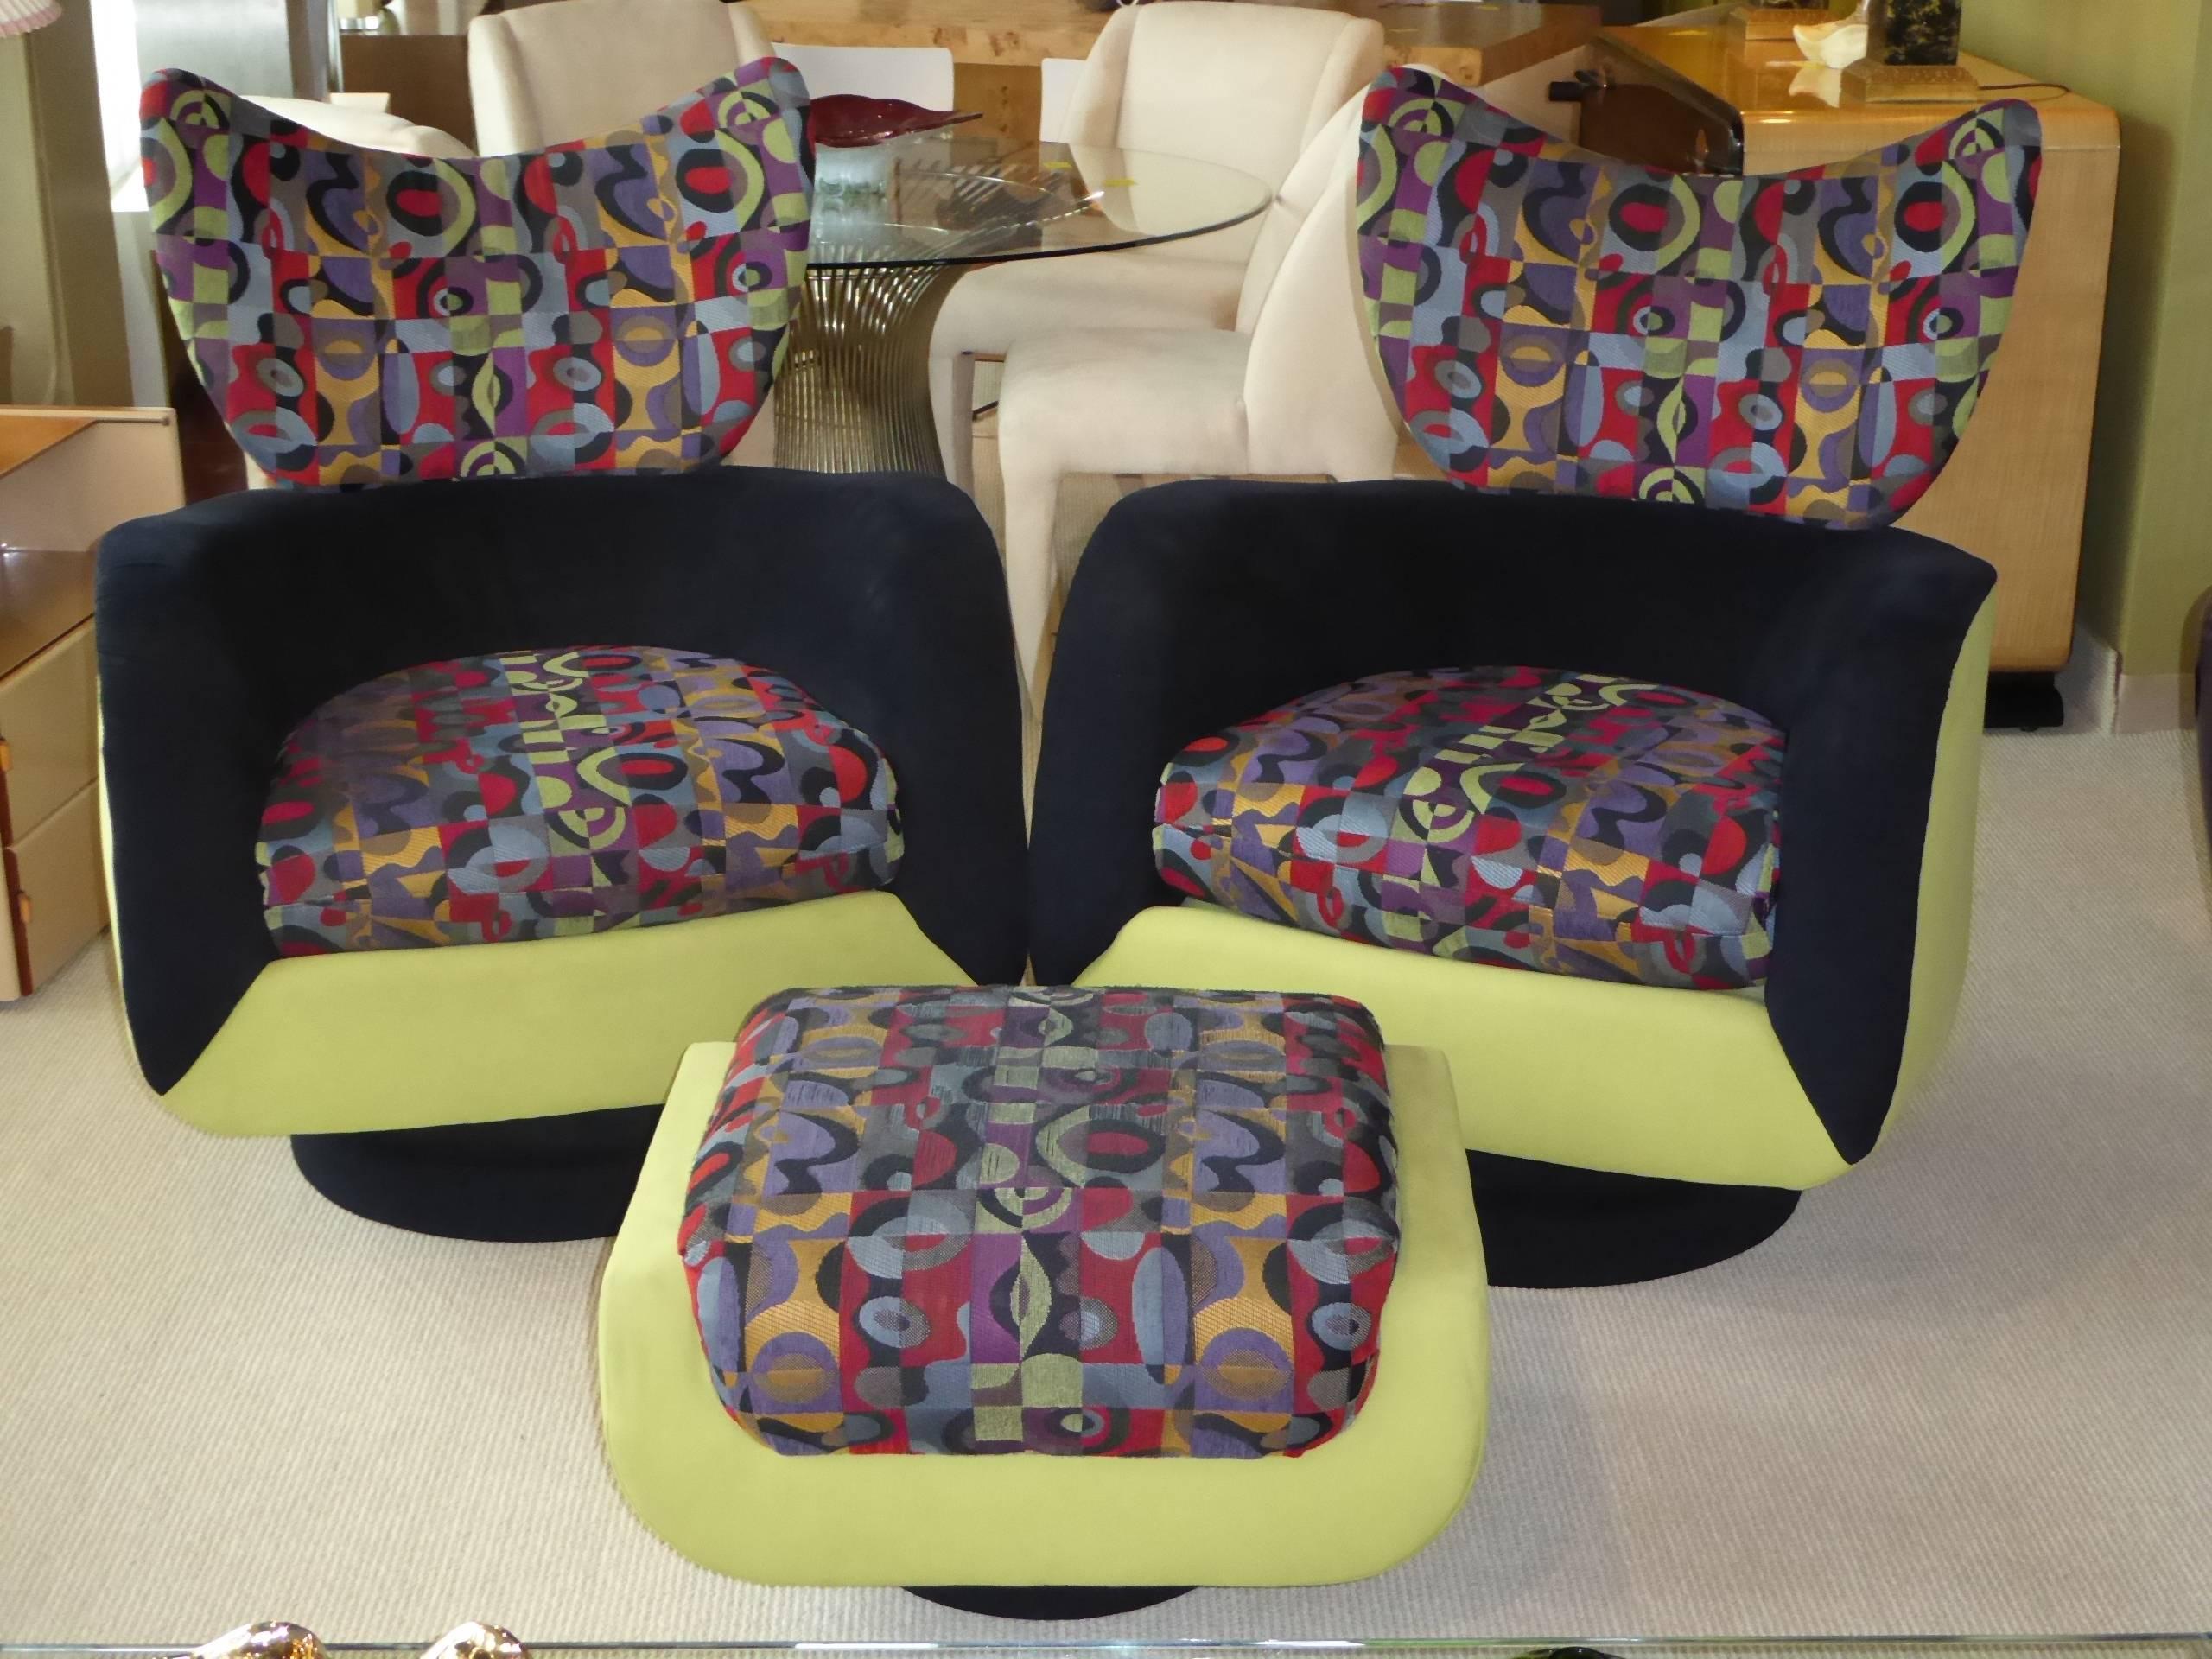 REDUCED FROM $9,500
Exceptional Kagan design for Directional, this pair of stylized wingback lounge chairs with an ottoman both swivel and rock. Sumptuously styled with enveloping curves and a large horned neck. In original fabrics, ready for